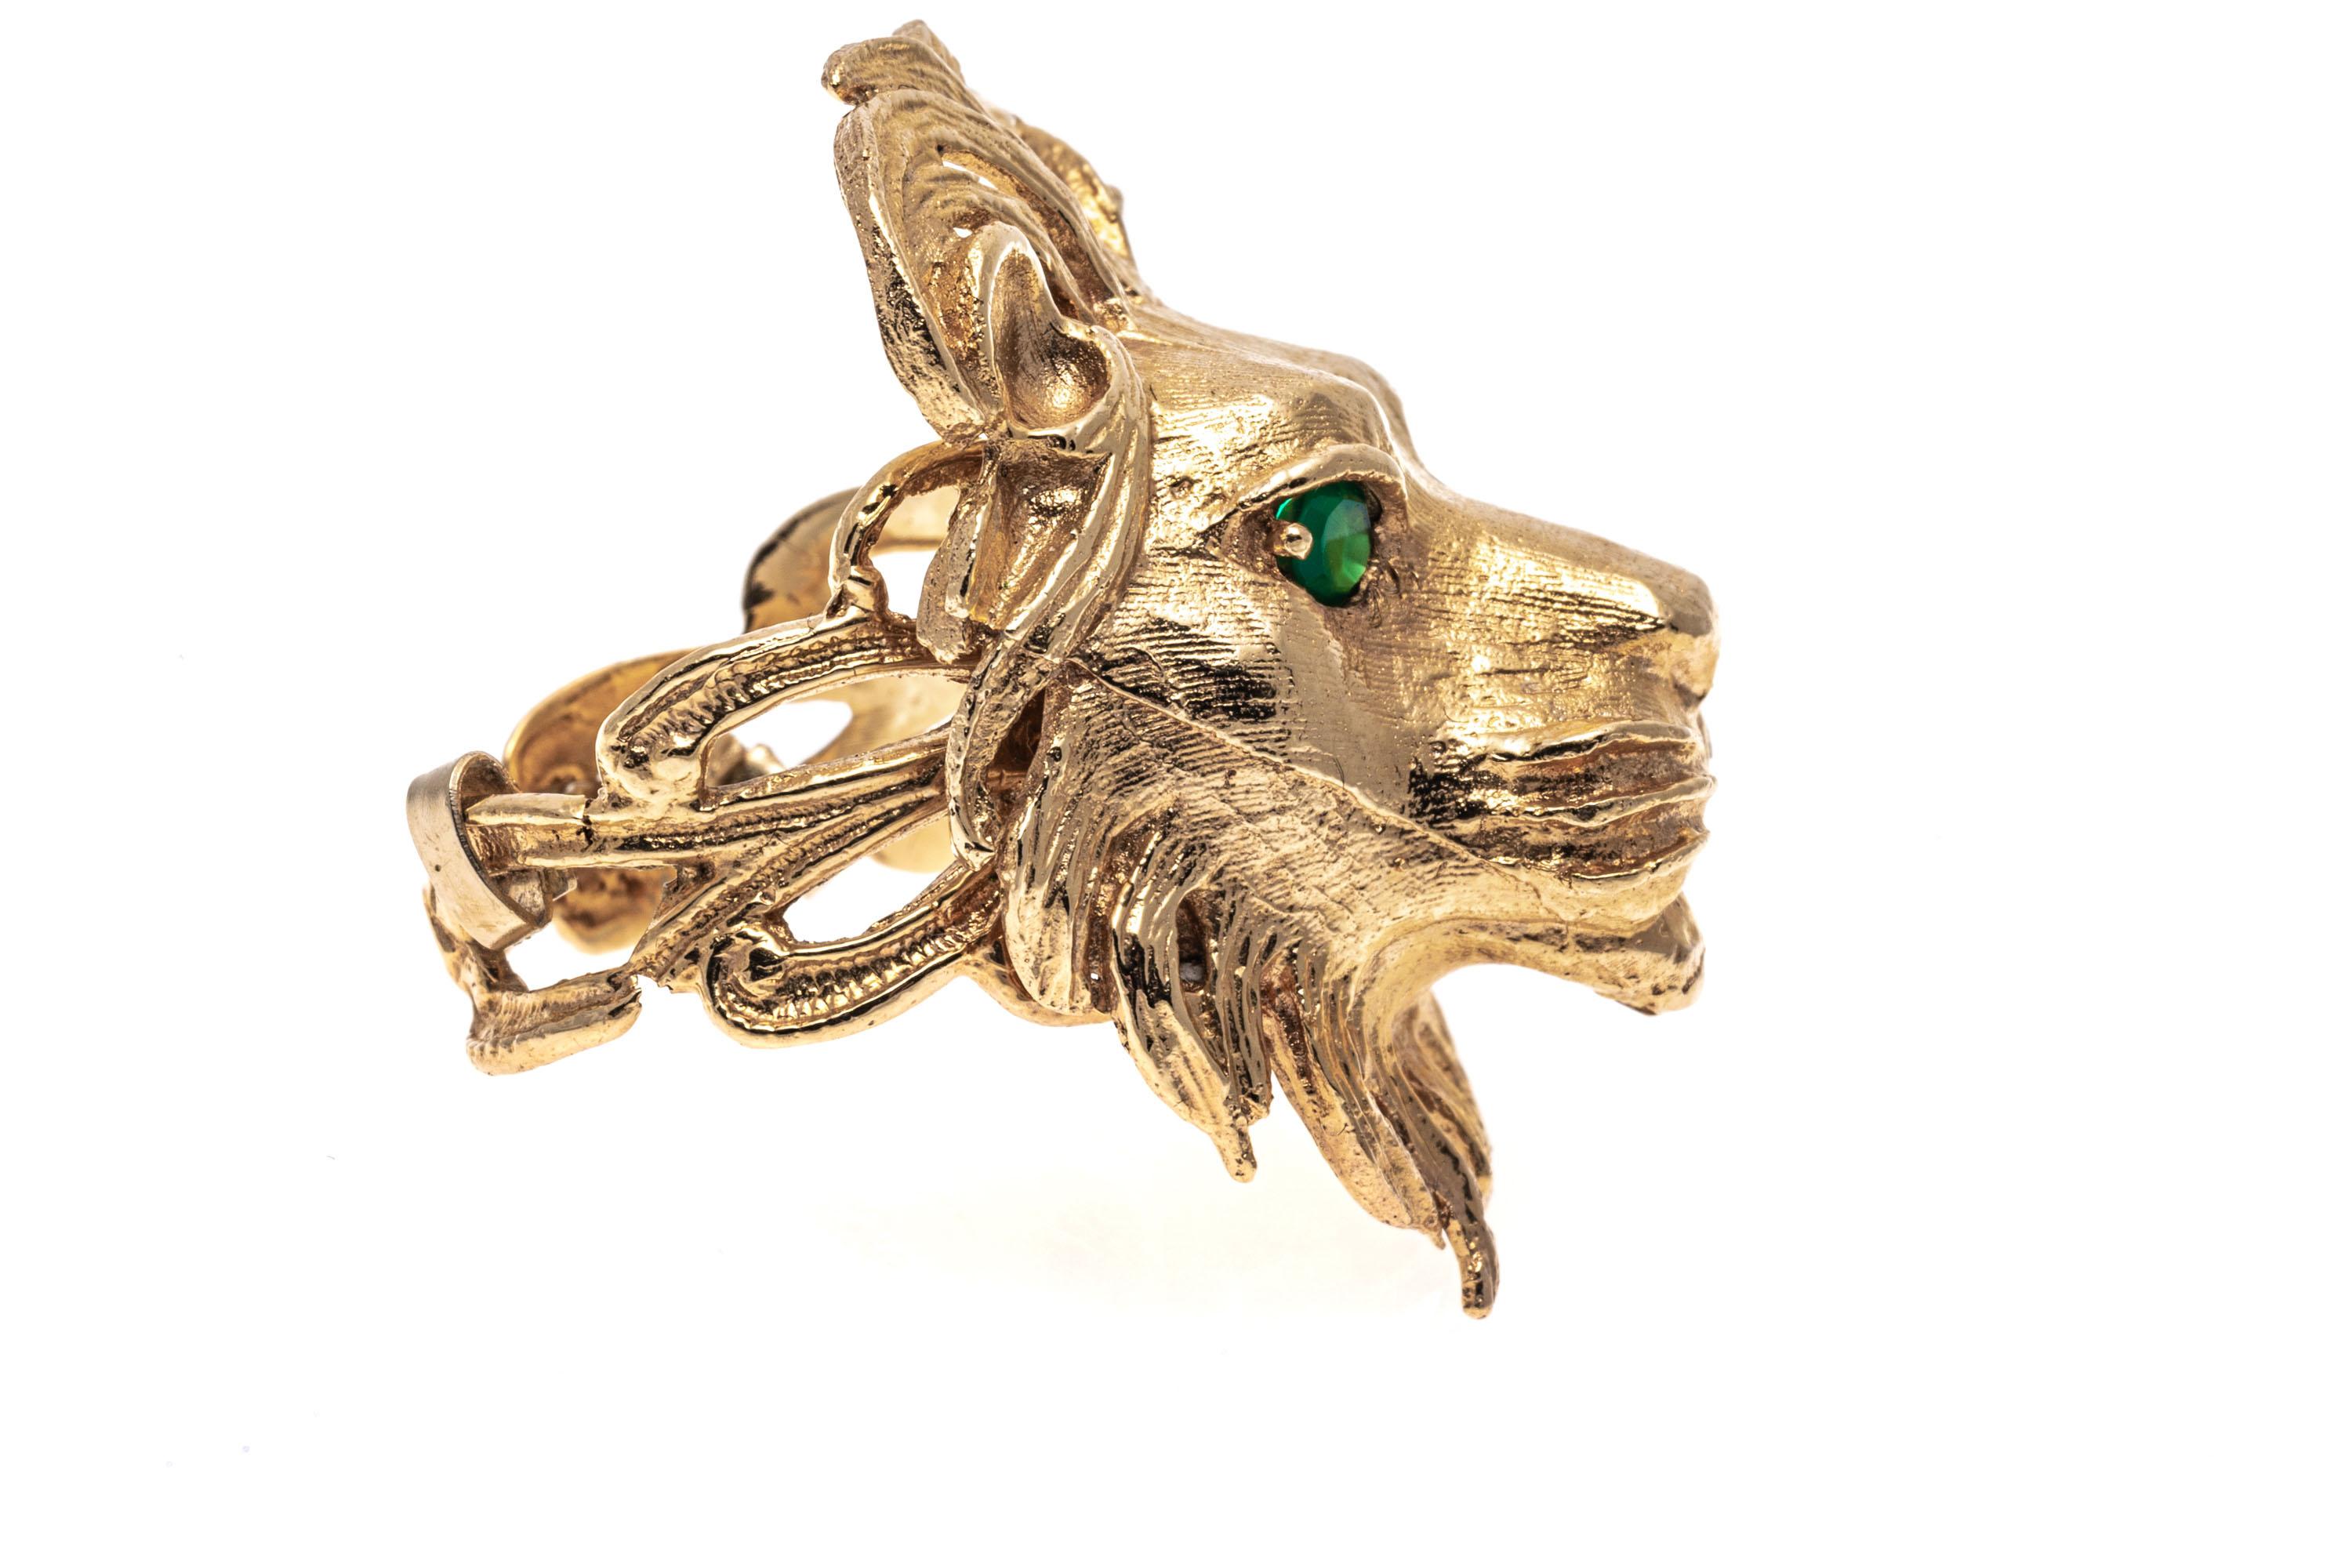 14k yellow gold ring. This classic ring is a large, matte finished, figural lions head, set with round faceted, green color green chalcedony eyes, and finished with open loop style shoulders.
Marks: 14k
Dimensions: 7/8